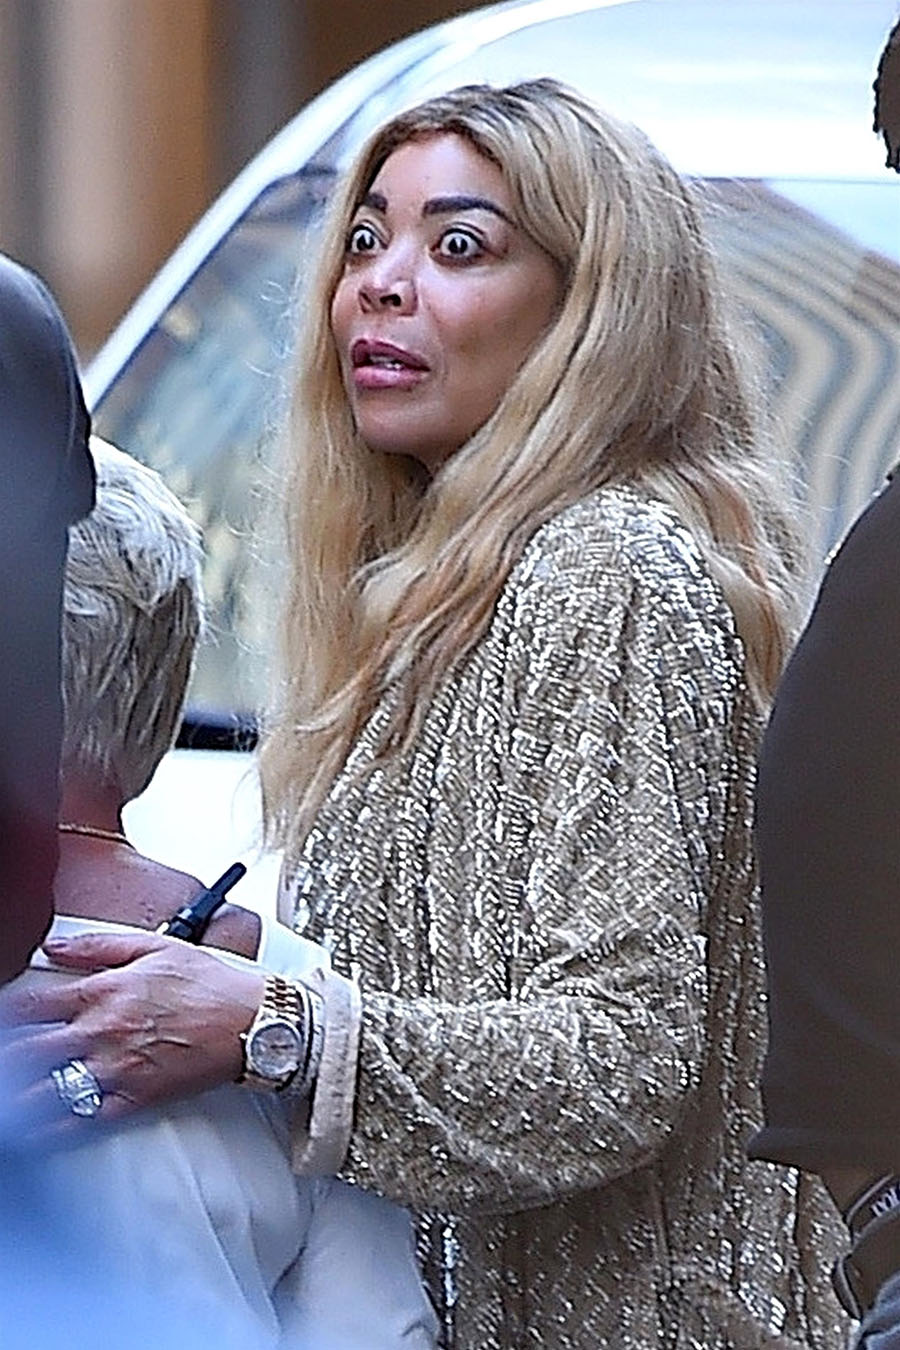 Wendy Williams, who was diagnosed with Graves’ disease (hyperthyroidism